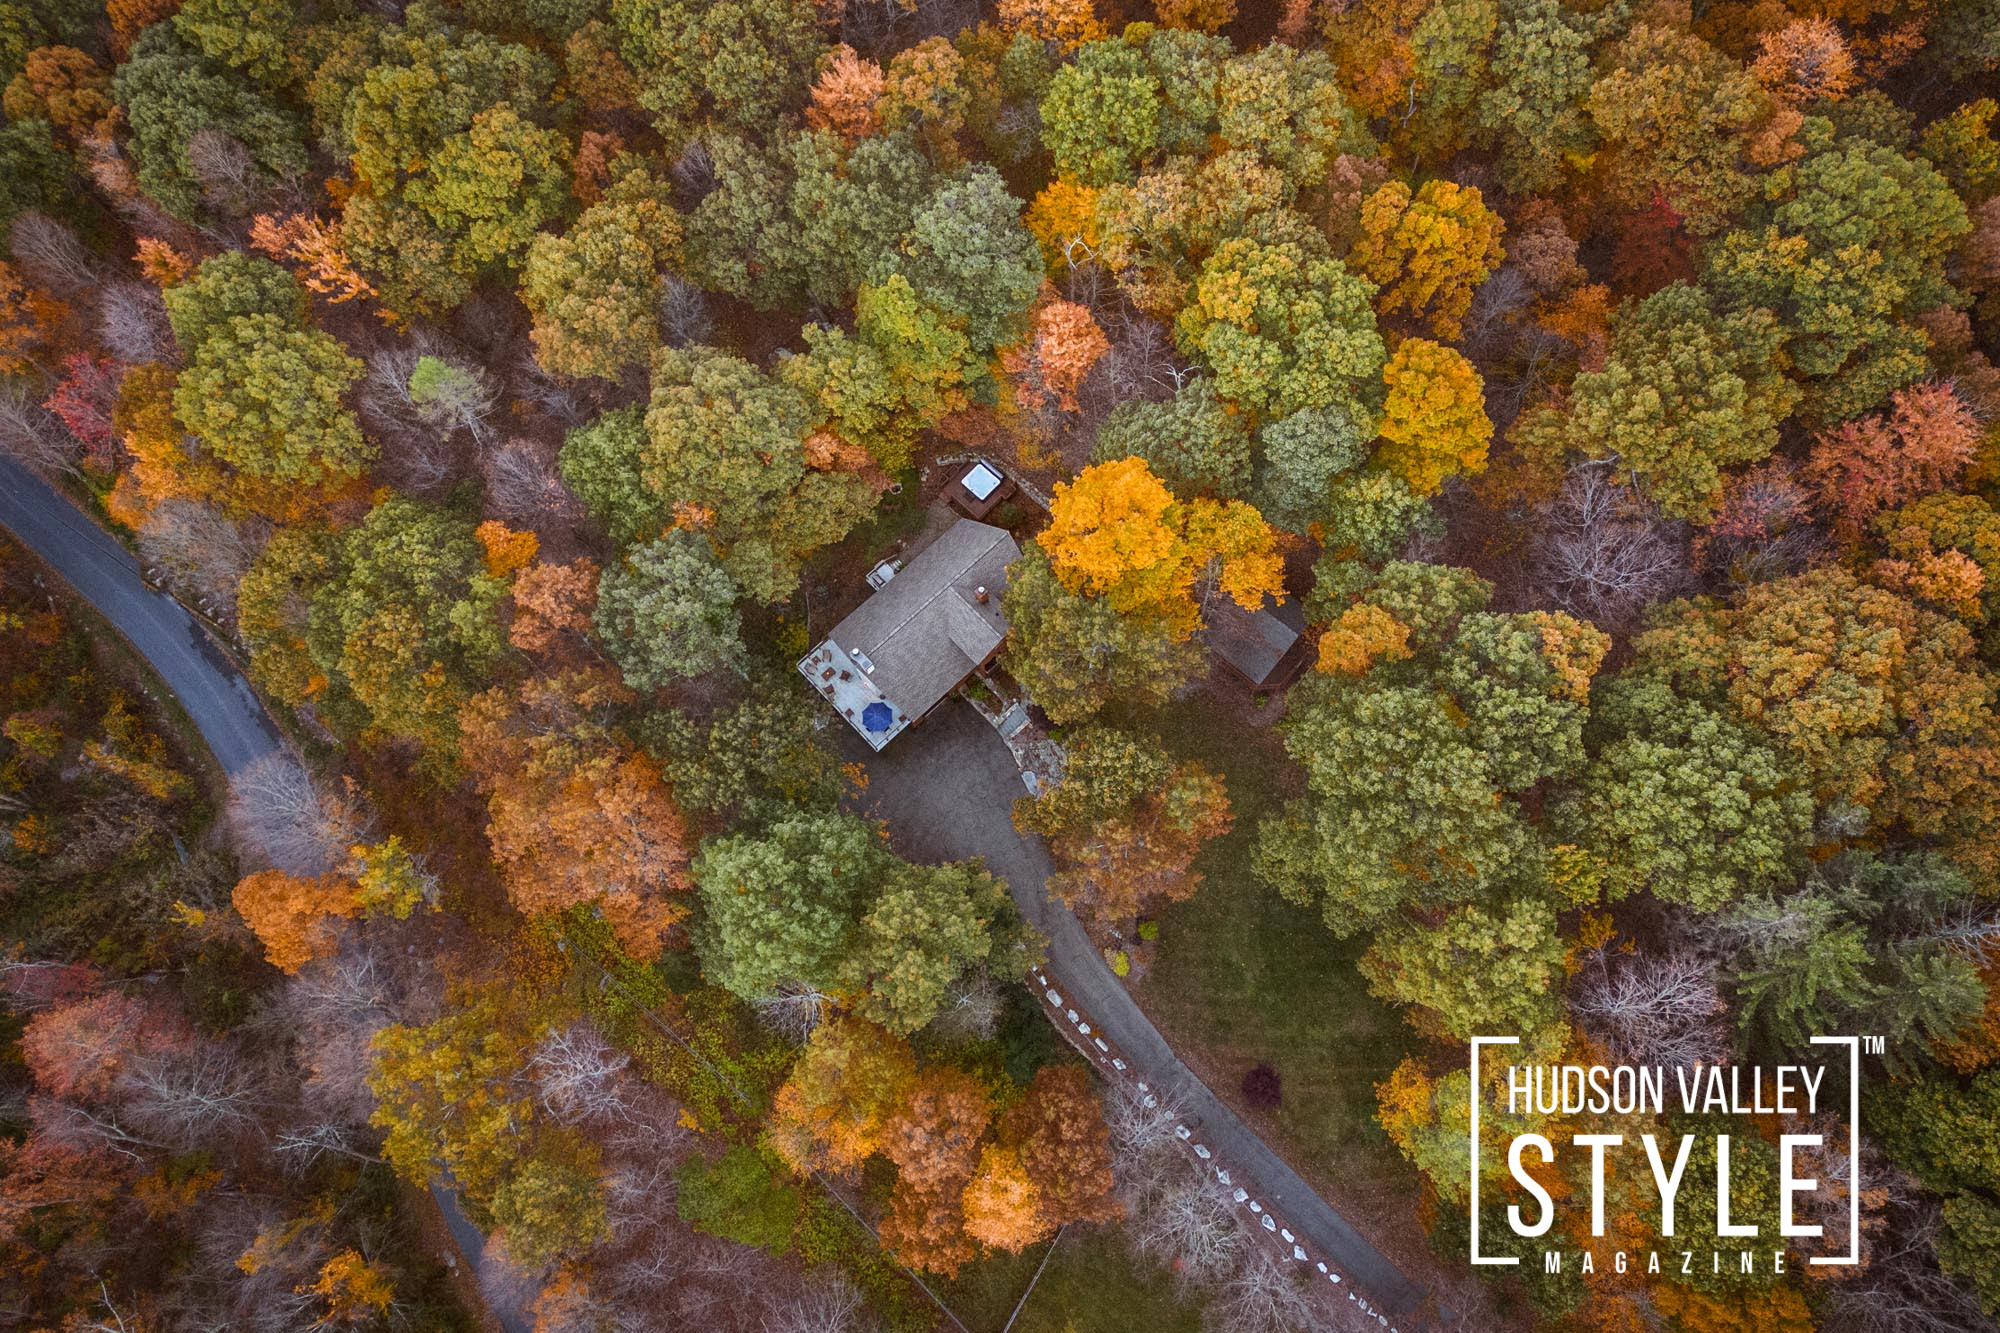 The Perfect Fall Getaway: An A-Frame Airbnb Cabin in Cold Spring, NY – Presented by Alluvion Vacations – Photography by Maxwell Alexander